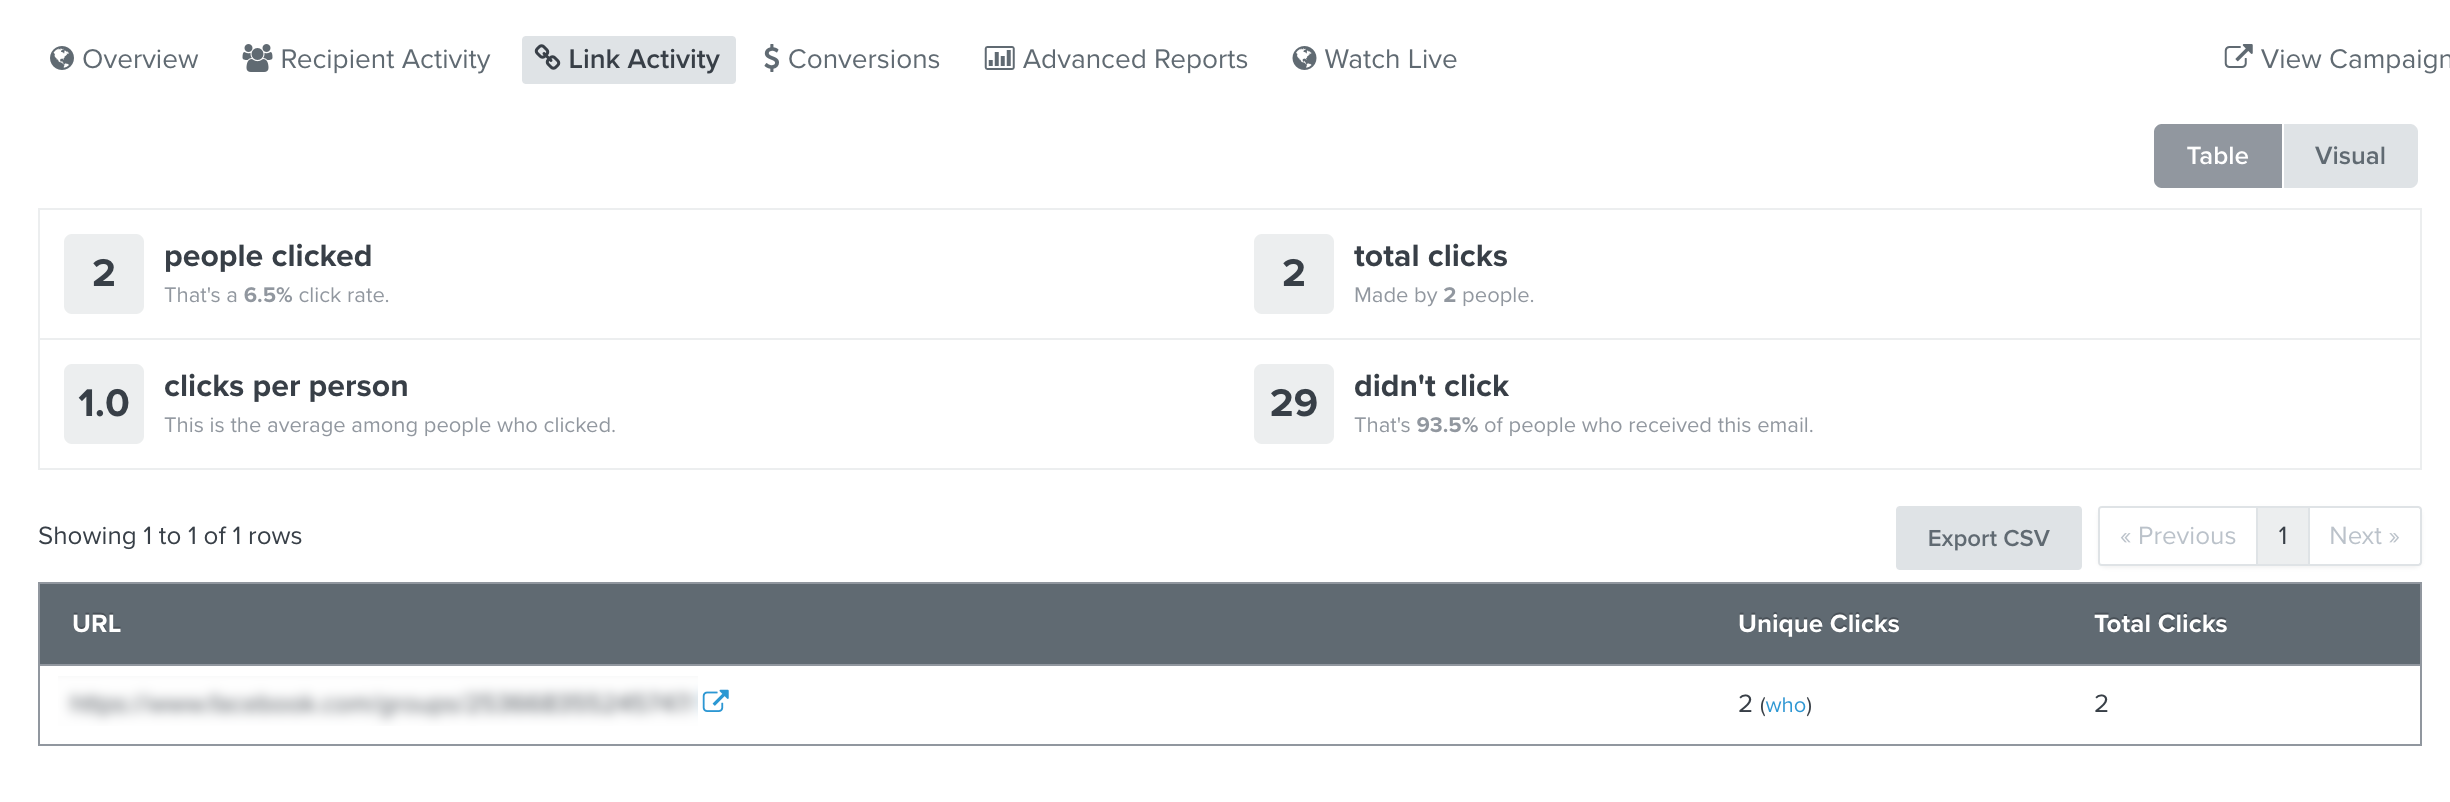 View of the Link Activity tab showing number of clicks, clicks per person, total clicks, and those who didn't click your email